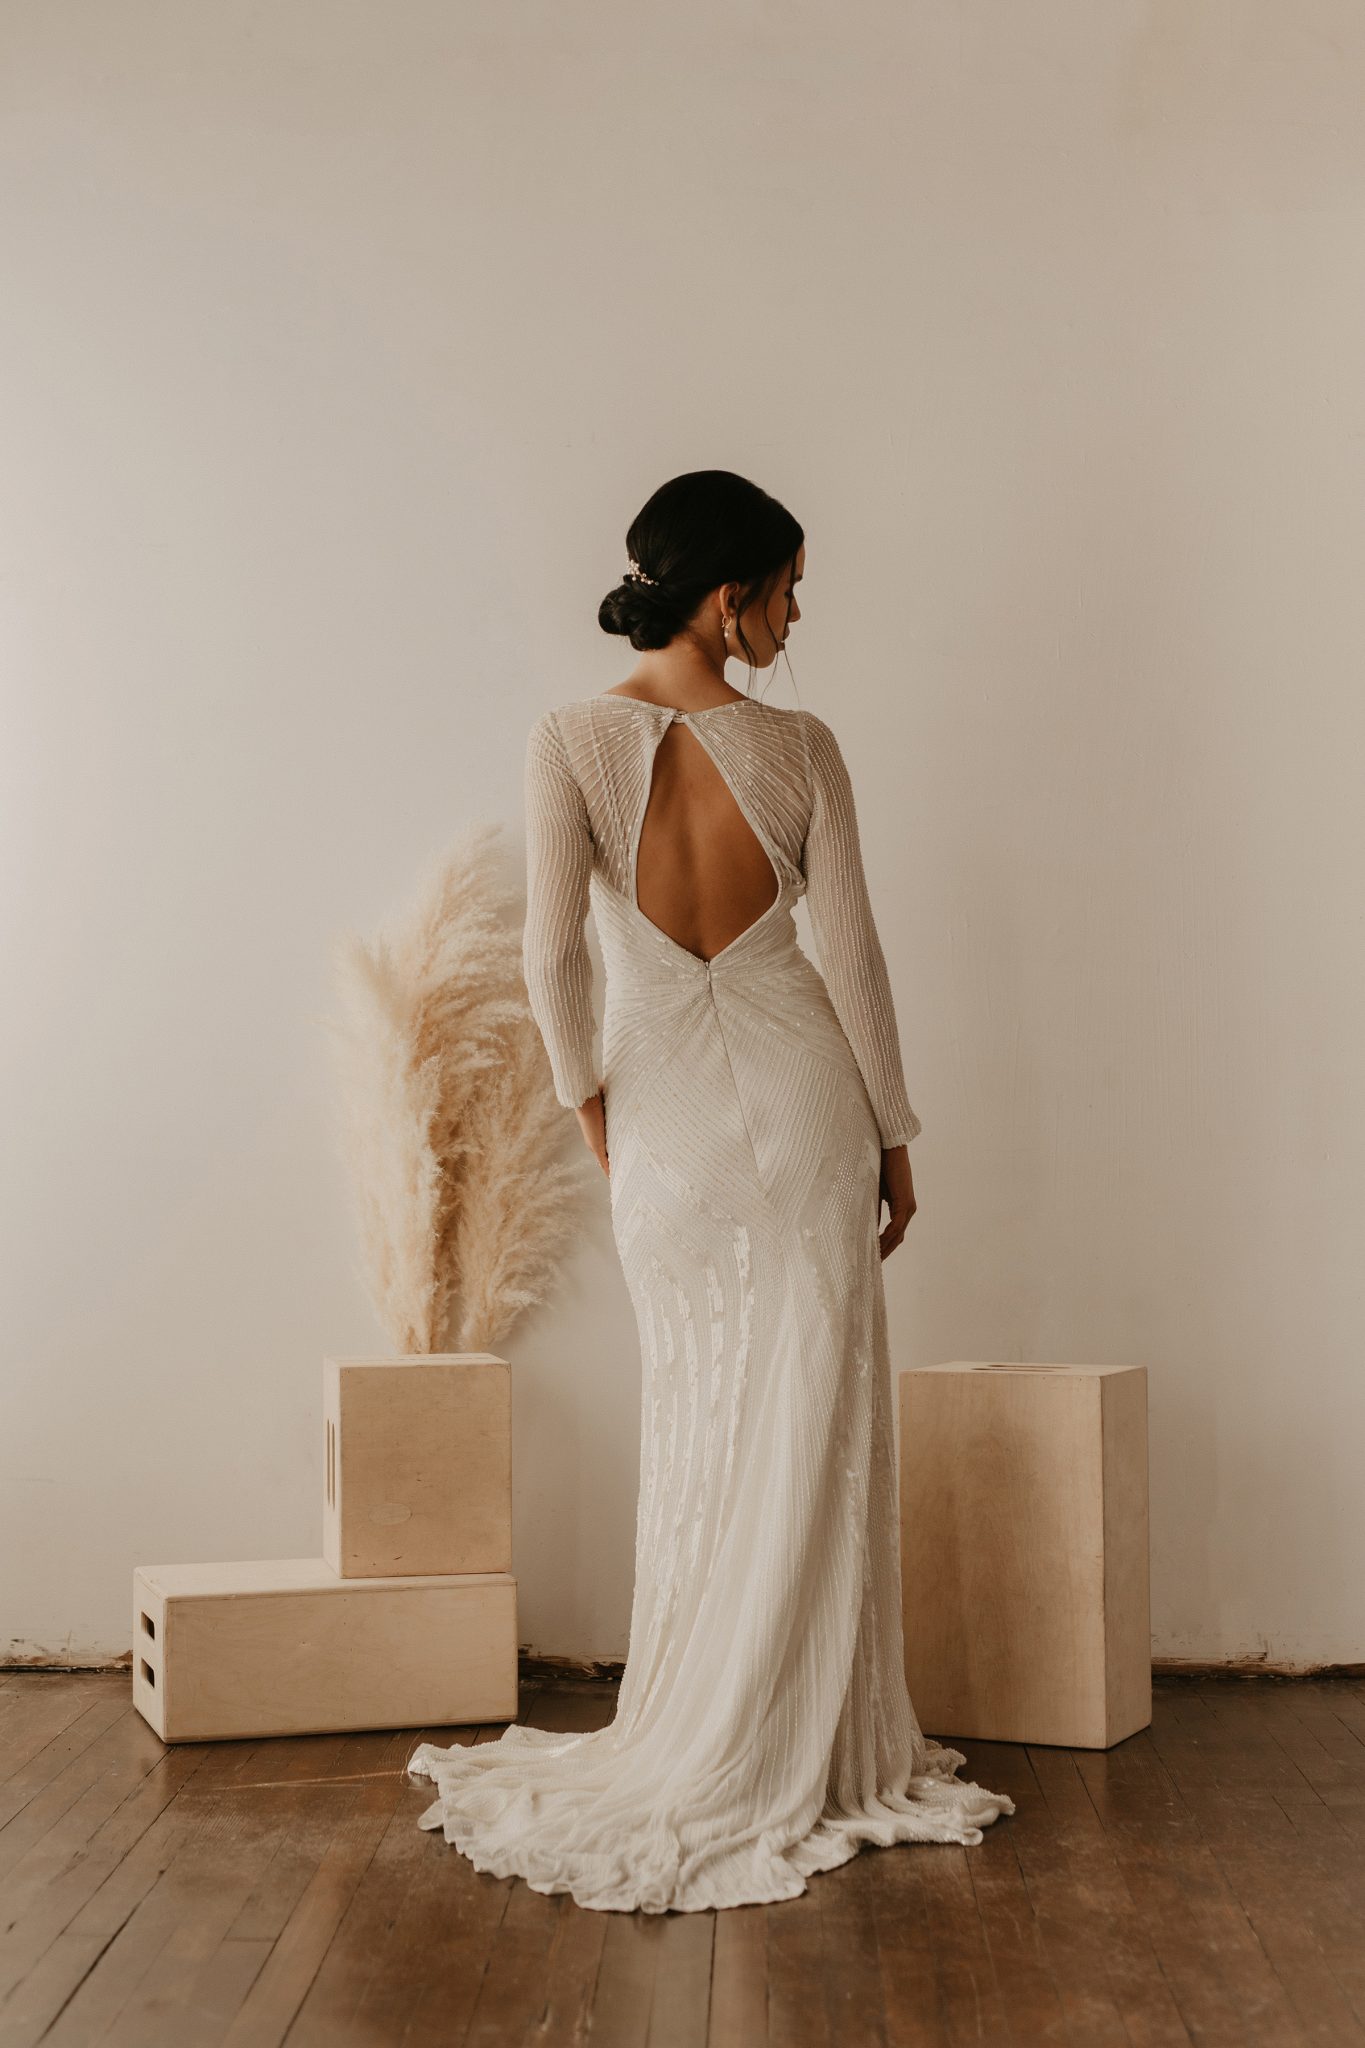 Bridal Minimalism Feature on Bronte Bride: Delica Bridal Shares All About New Bridal Trends & Dress Shopping During Covid, bridal feature, wedding dress, long sleeve wedding dress